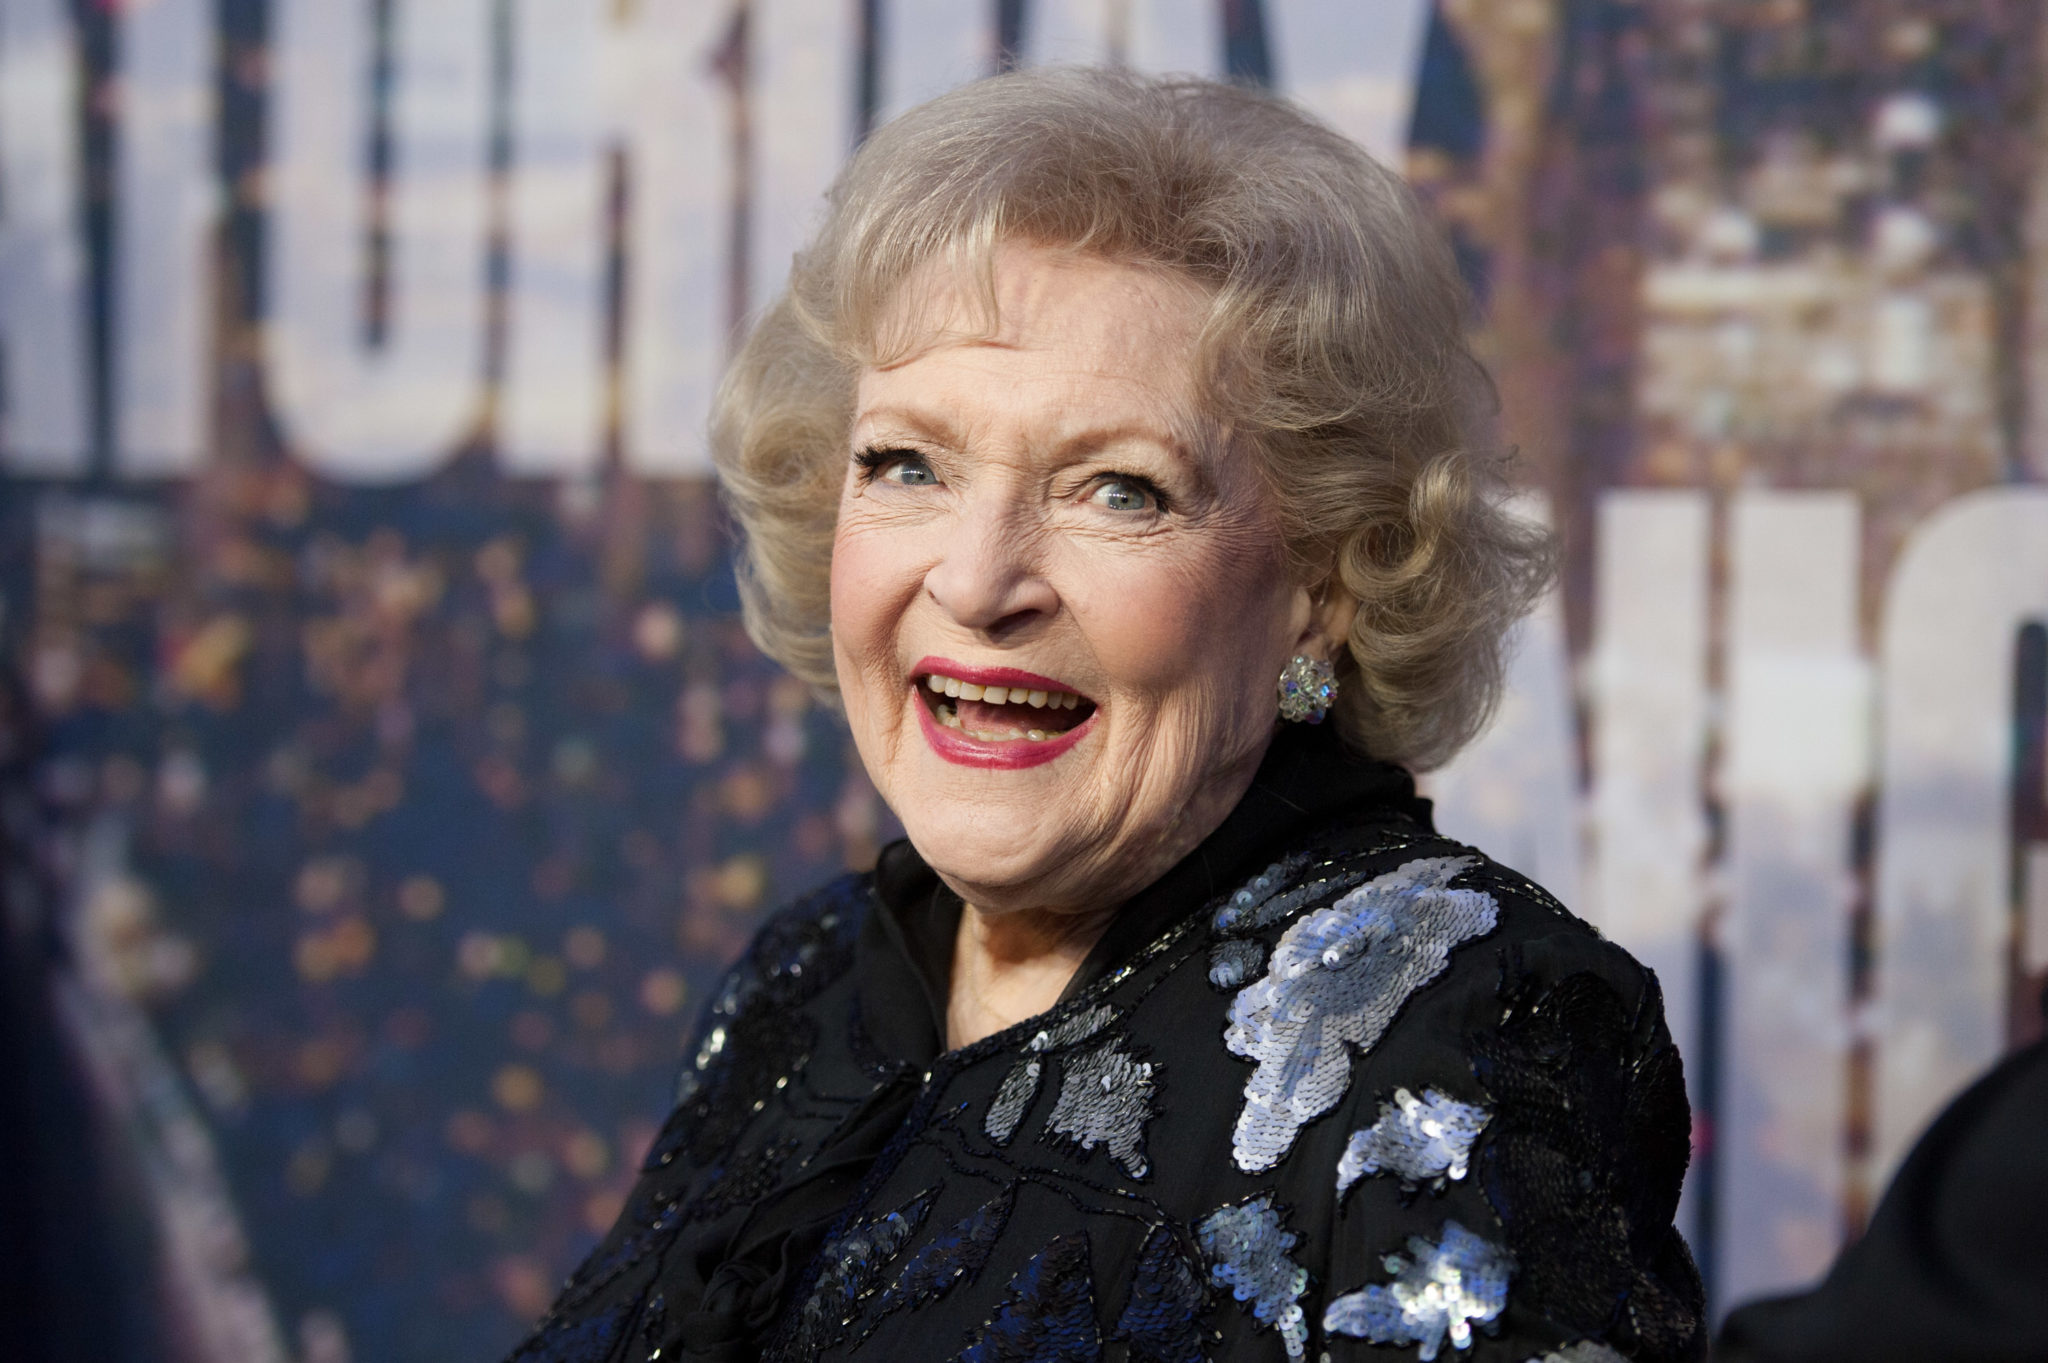 How old was Betty White when she hosted SNL? 